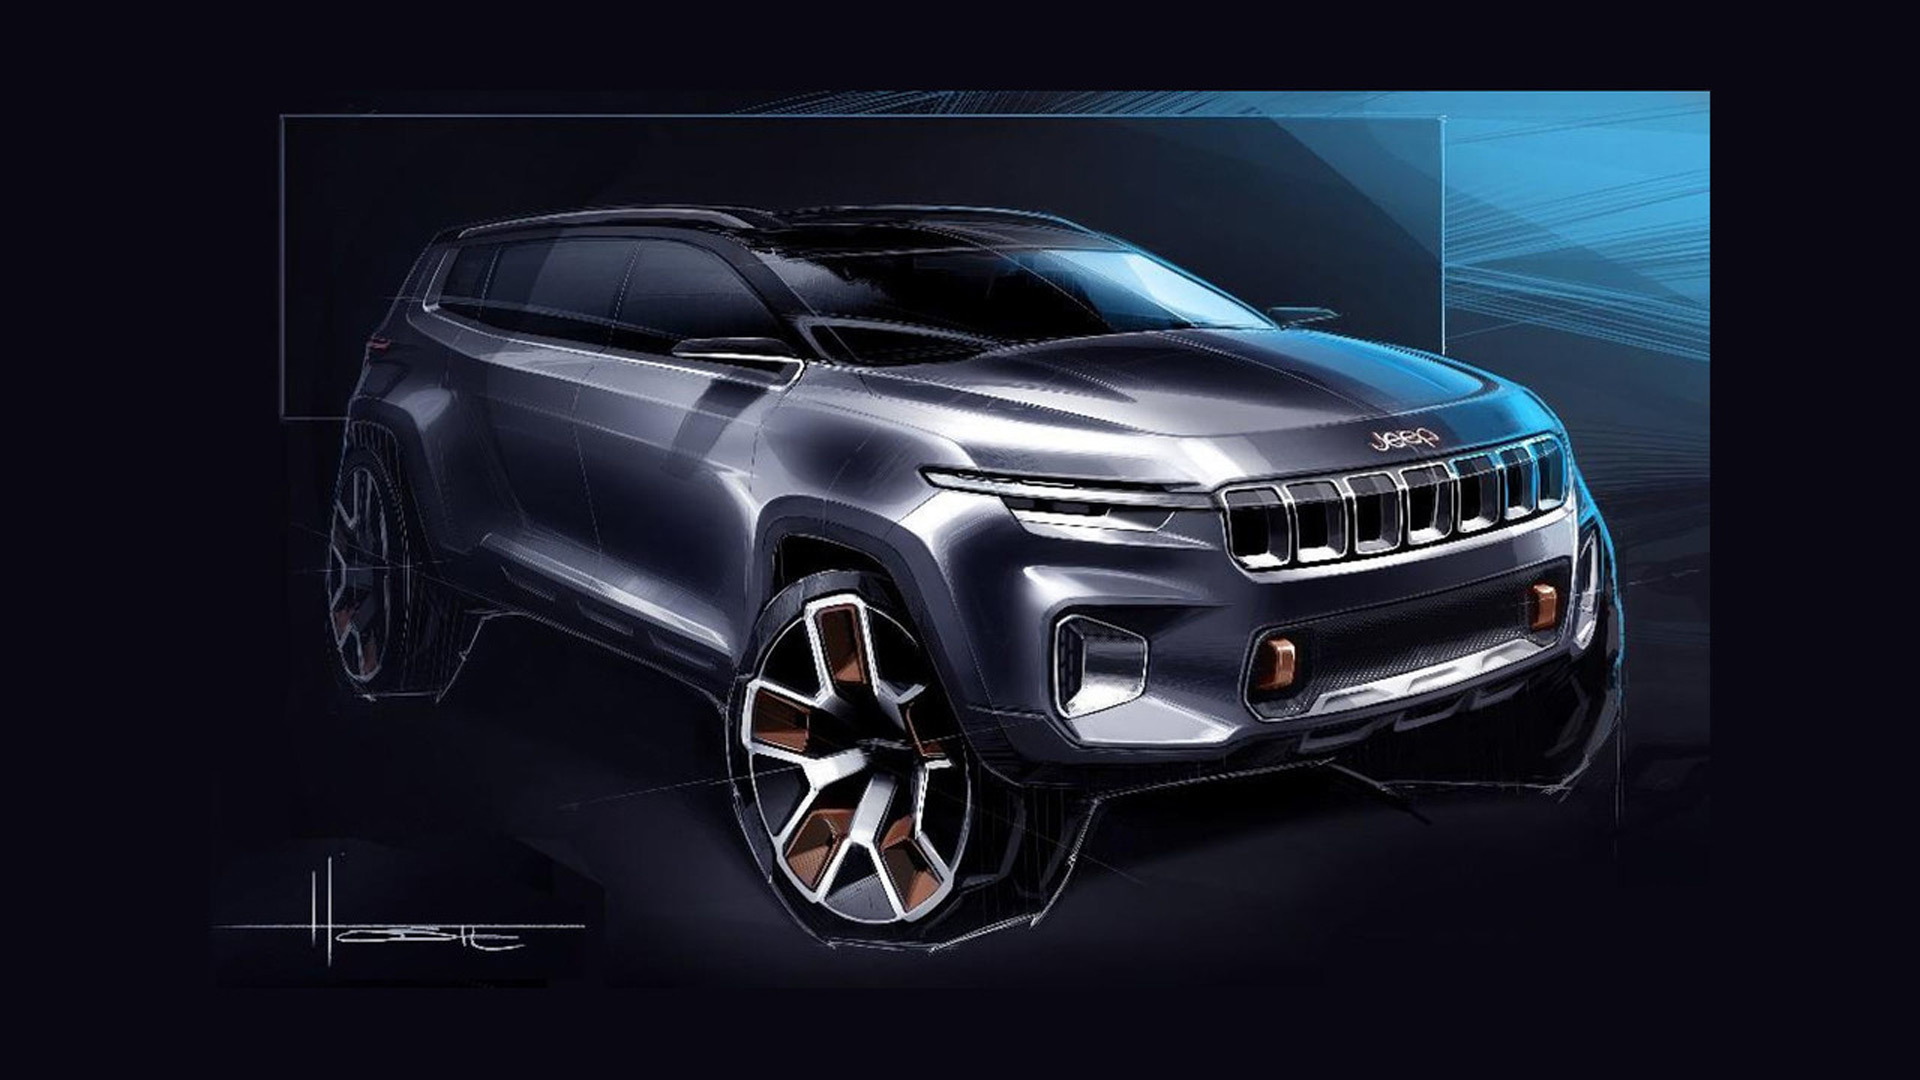 Teaser for Jeep concept debuting at 2017 Shanghai auto show